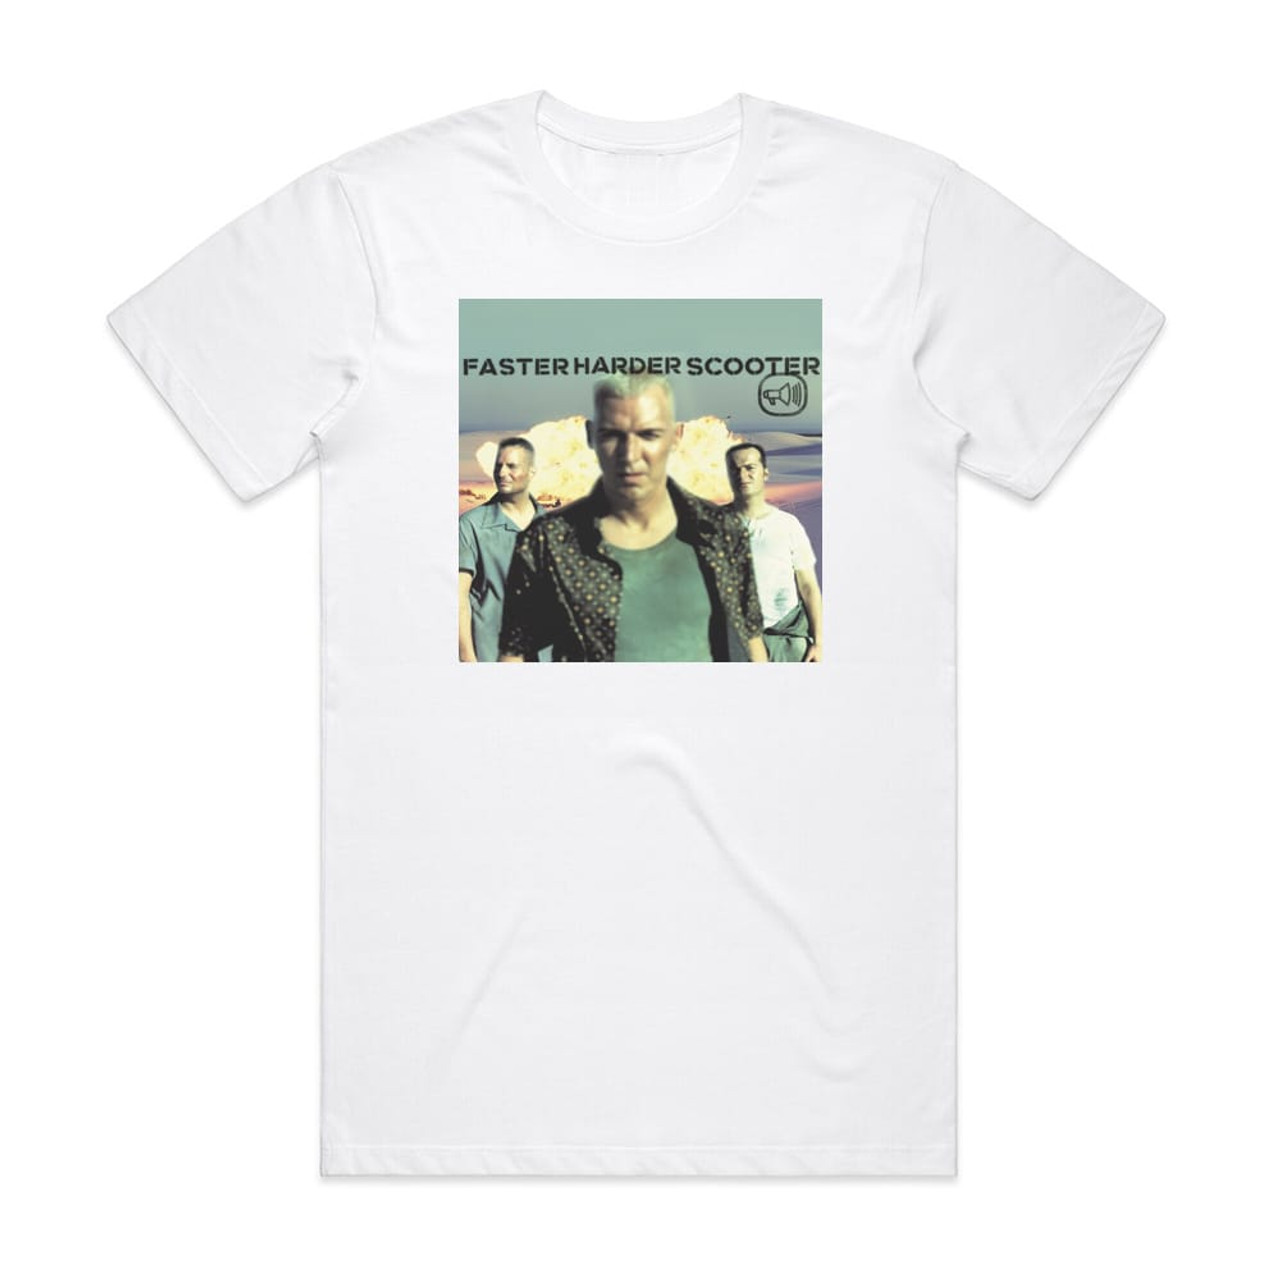 Faster Harder Scooter Album Cover T-Shirt White